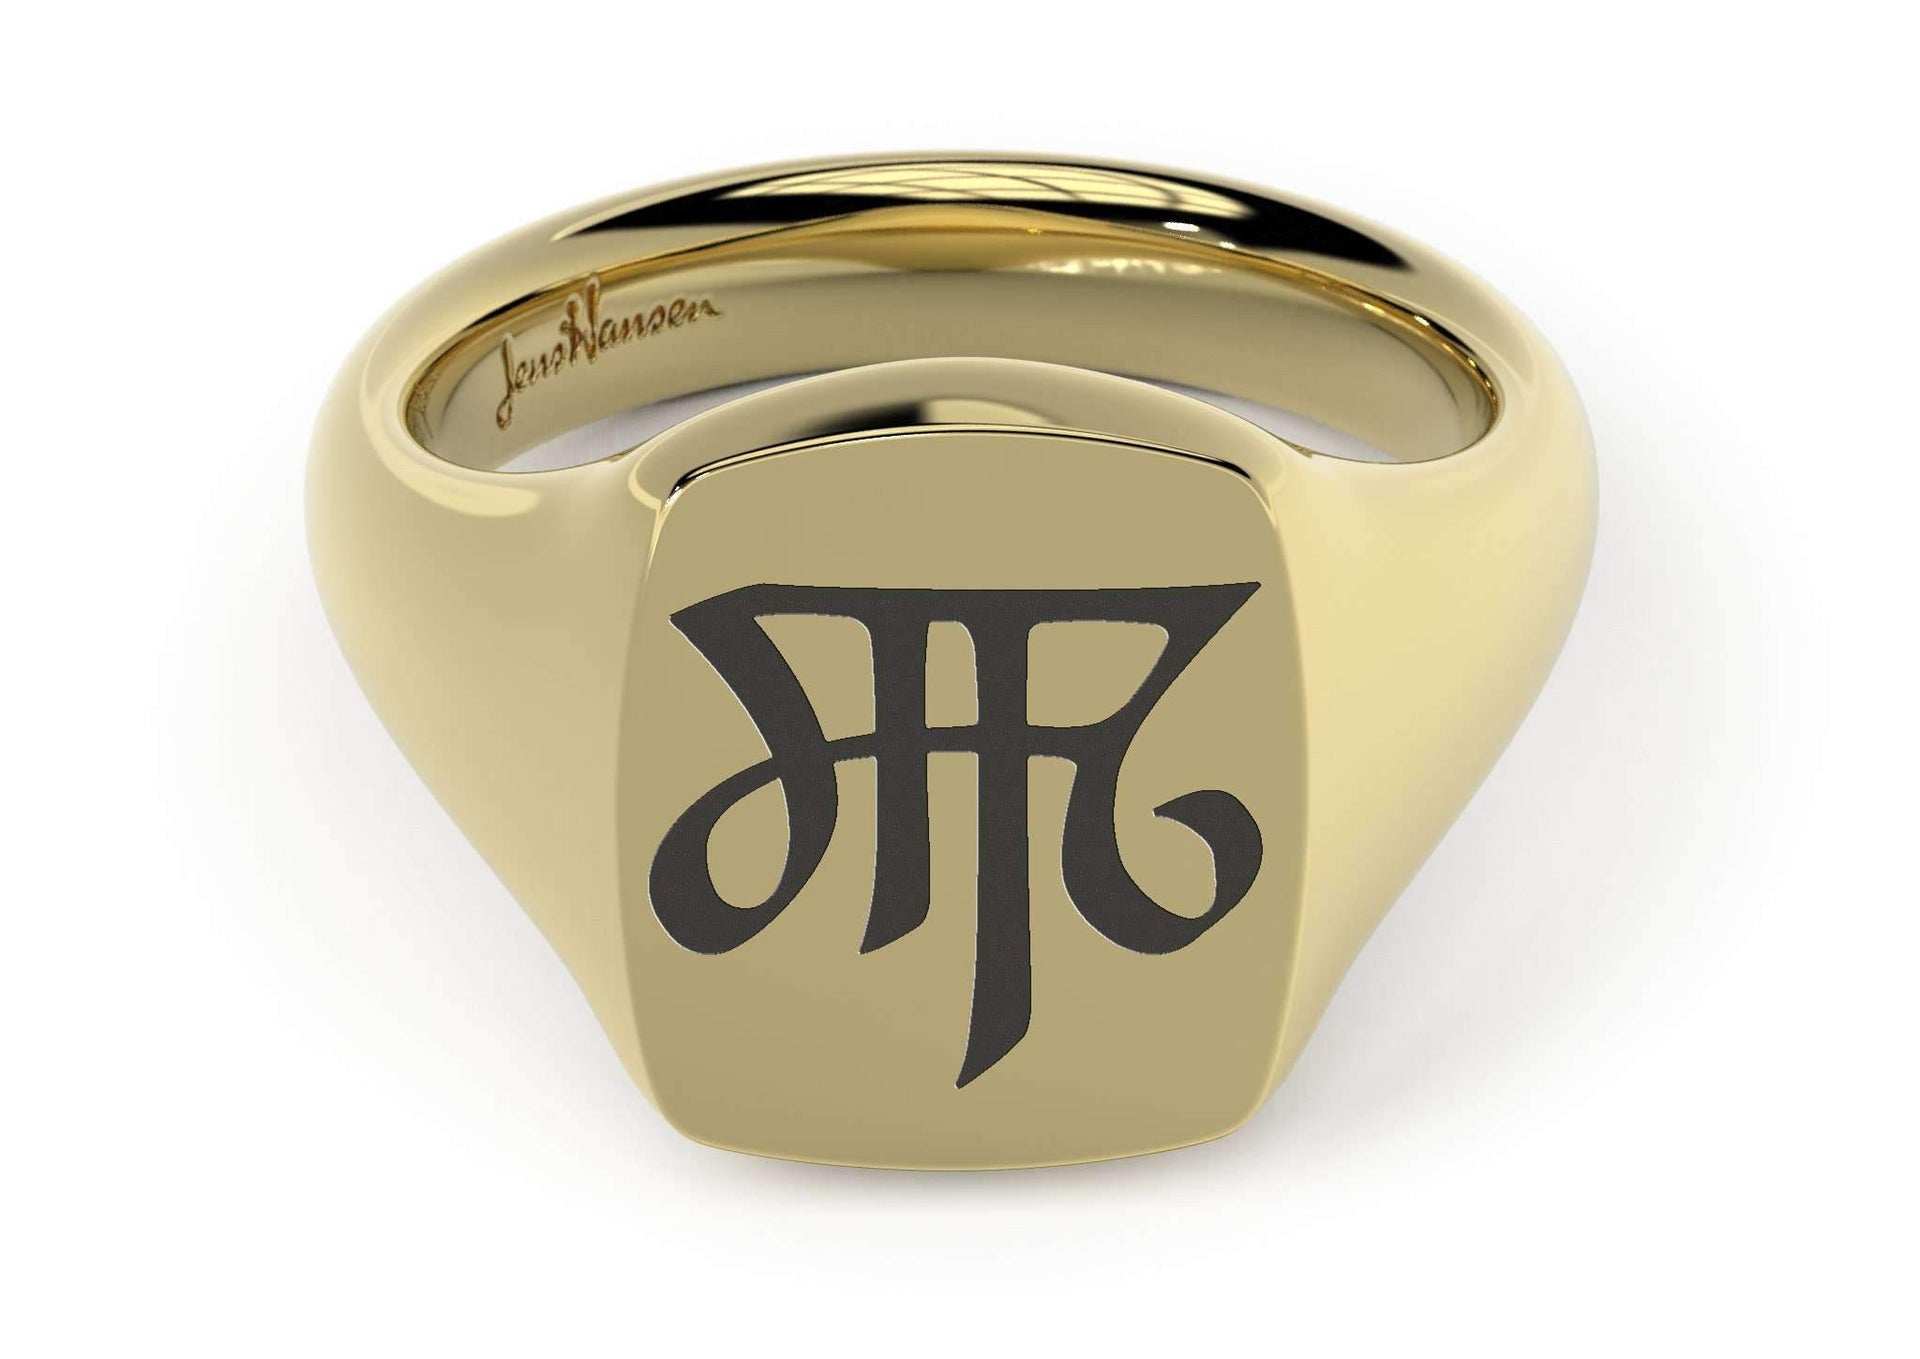 Enthusiastic Gold Men's Ring